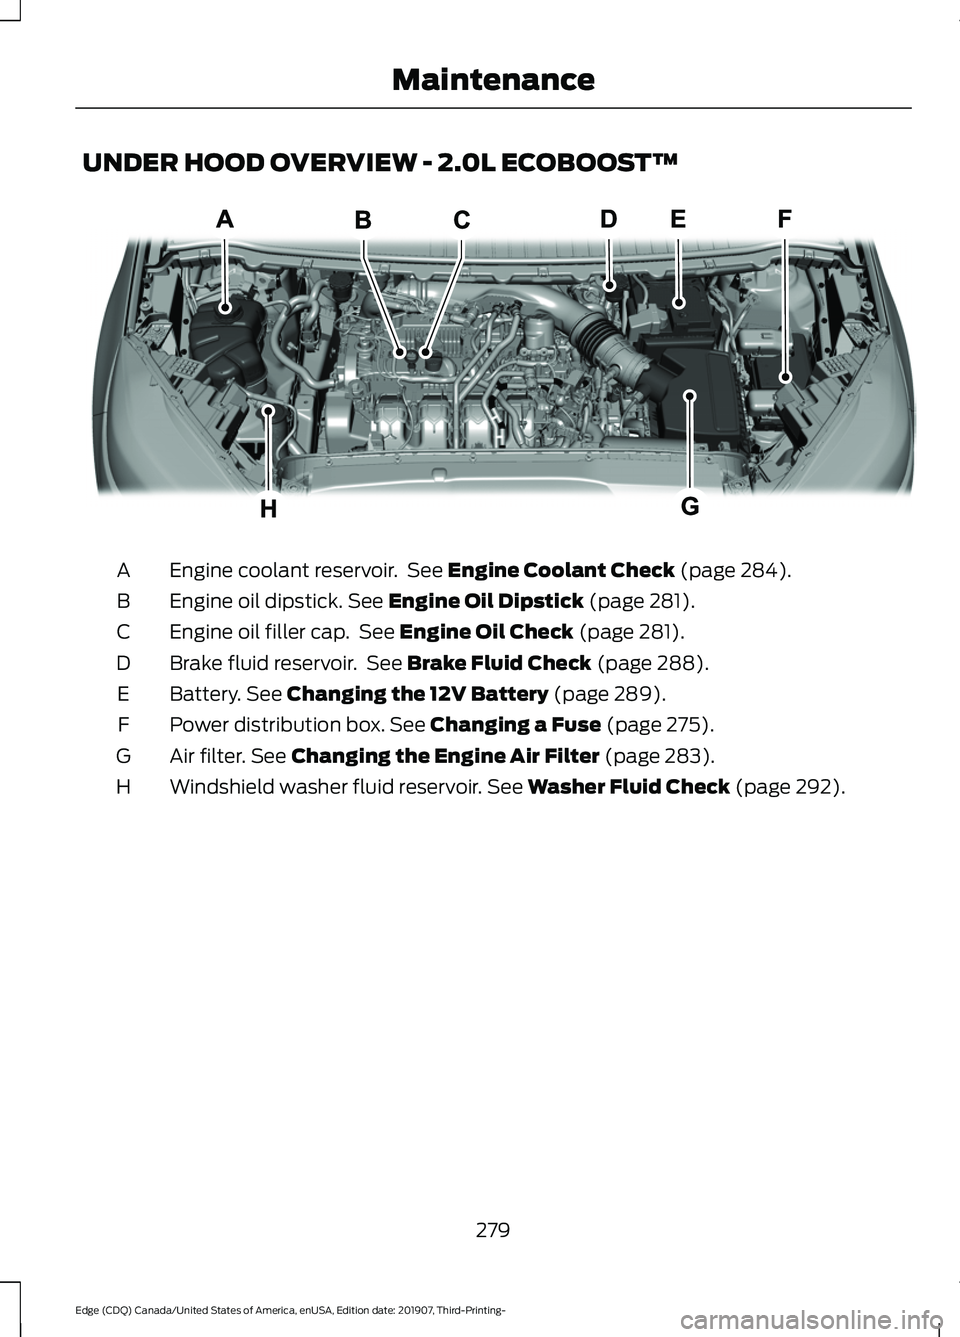 FORD EDGE 2020  Owners Manual UNDER HOOD OVERVIEW - 2.0L ECOBOOST™
Engine coolant reservoir.  See Engine Coolant Check (page 284).
A
Engine oil dipstick.
 See Engine Oil Dipstick (page 281).
B
Engine oil filler cap.  See 
Engine